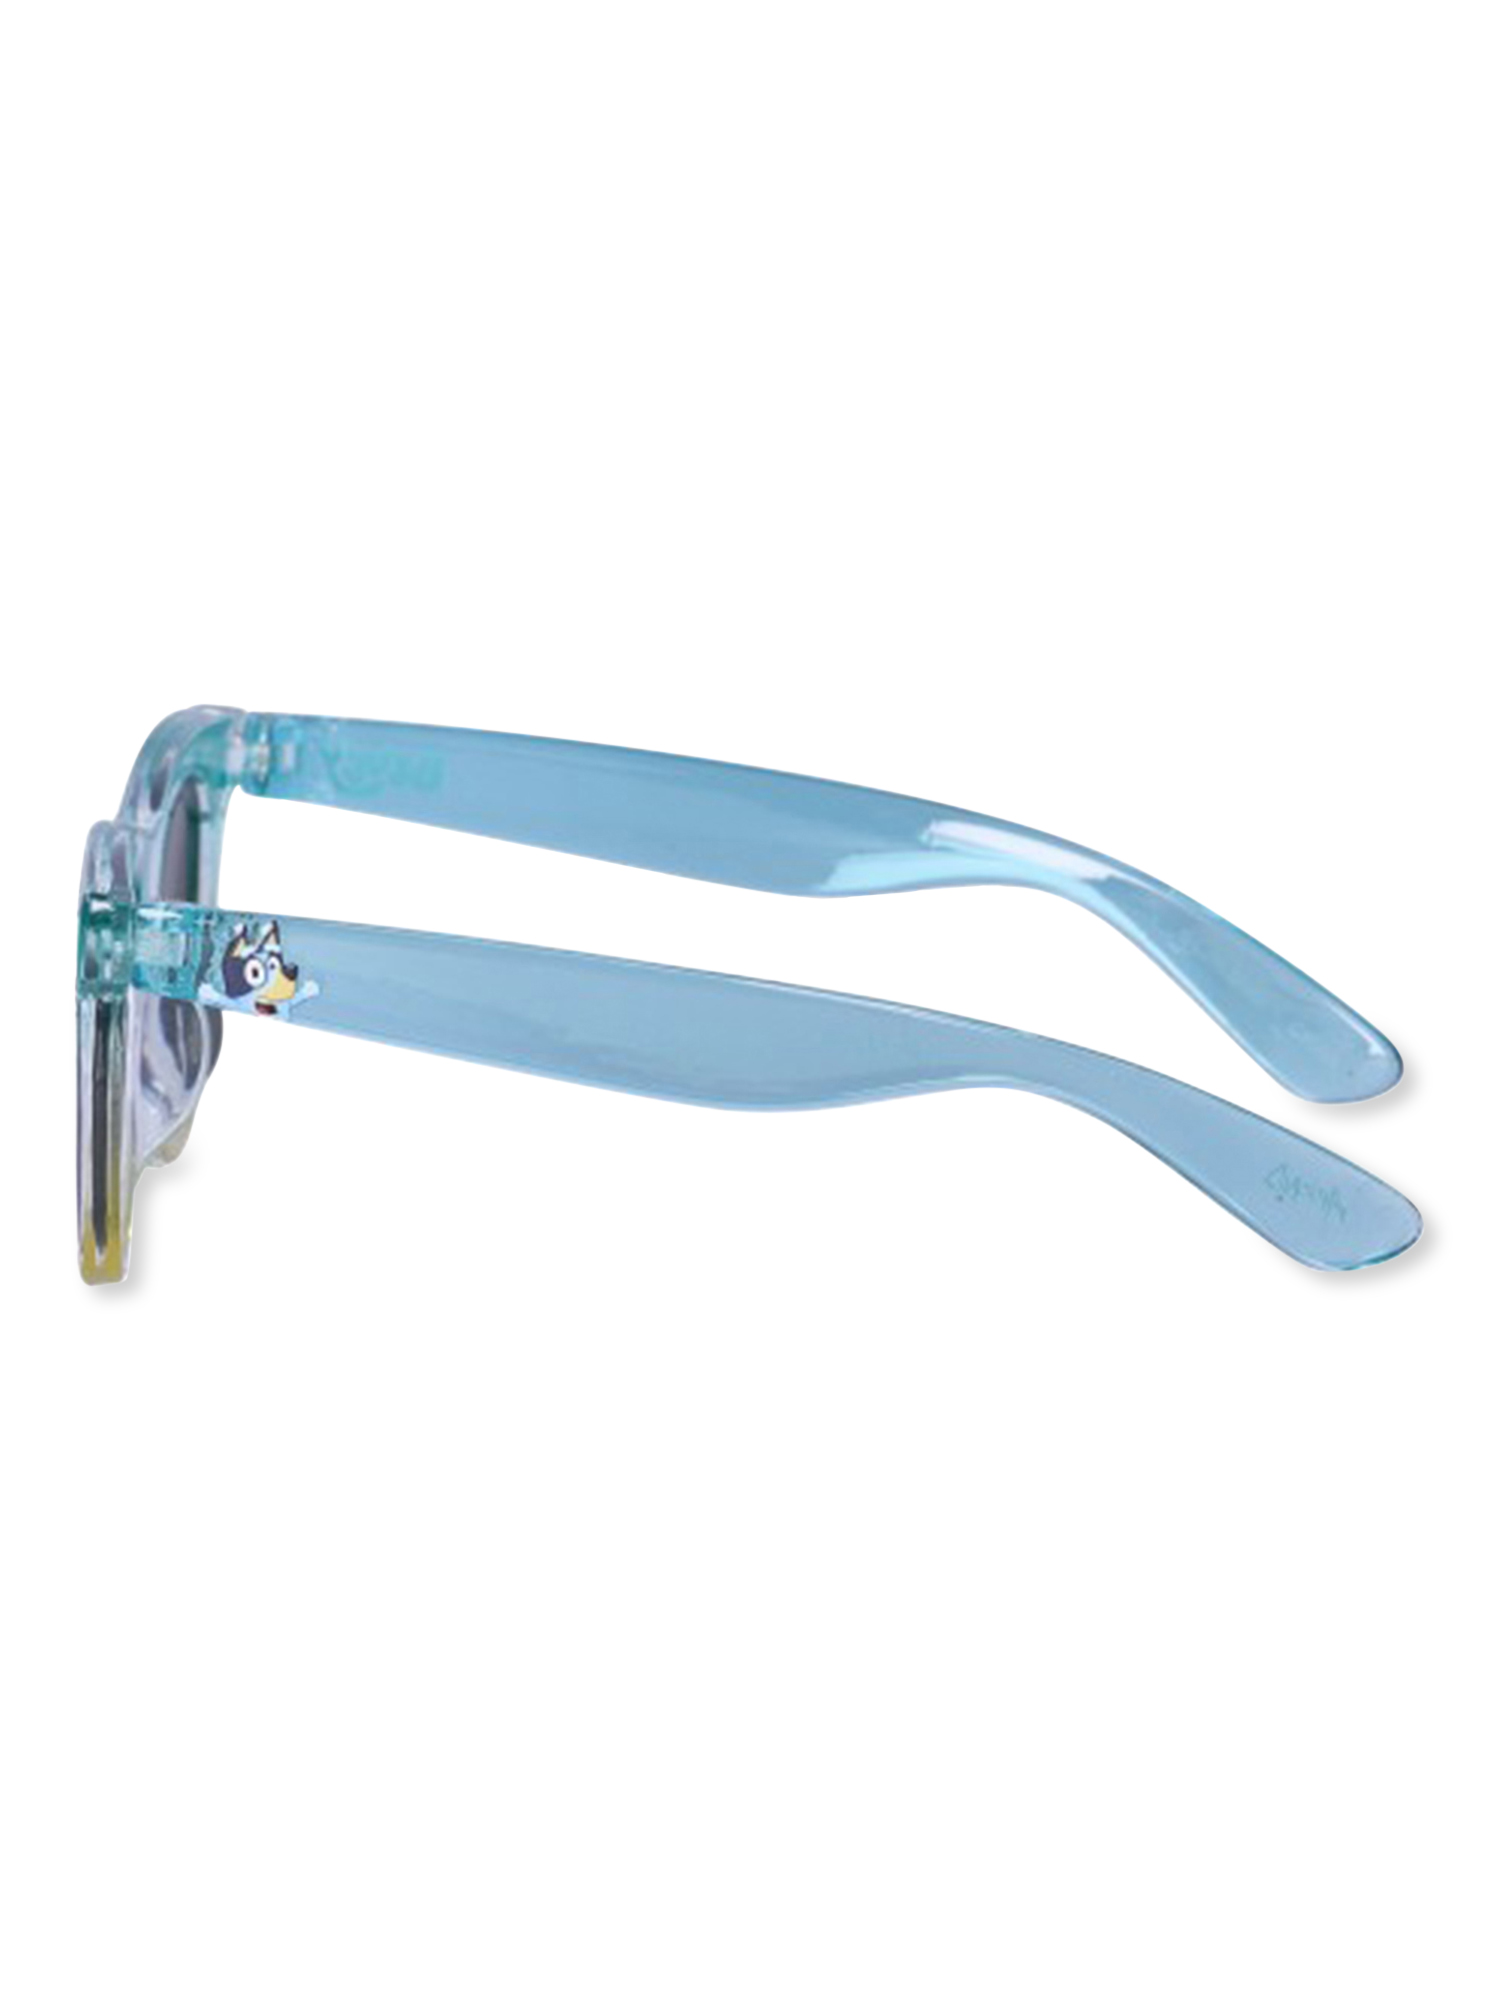 Bluey Kids Classic Sunglasses with UV Protection Blue - image 4 of 4